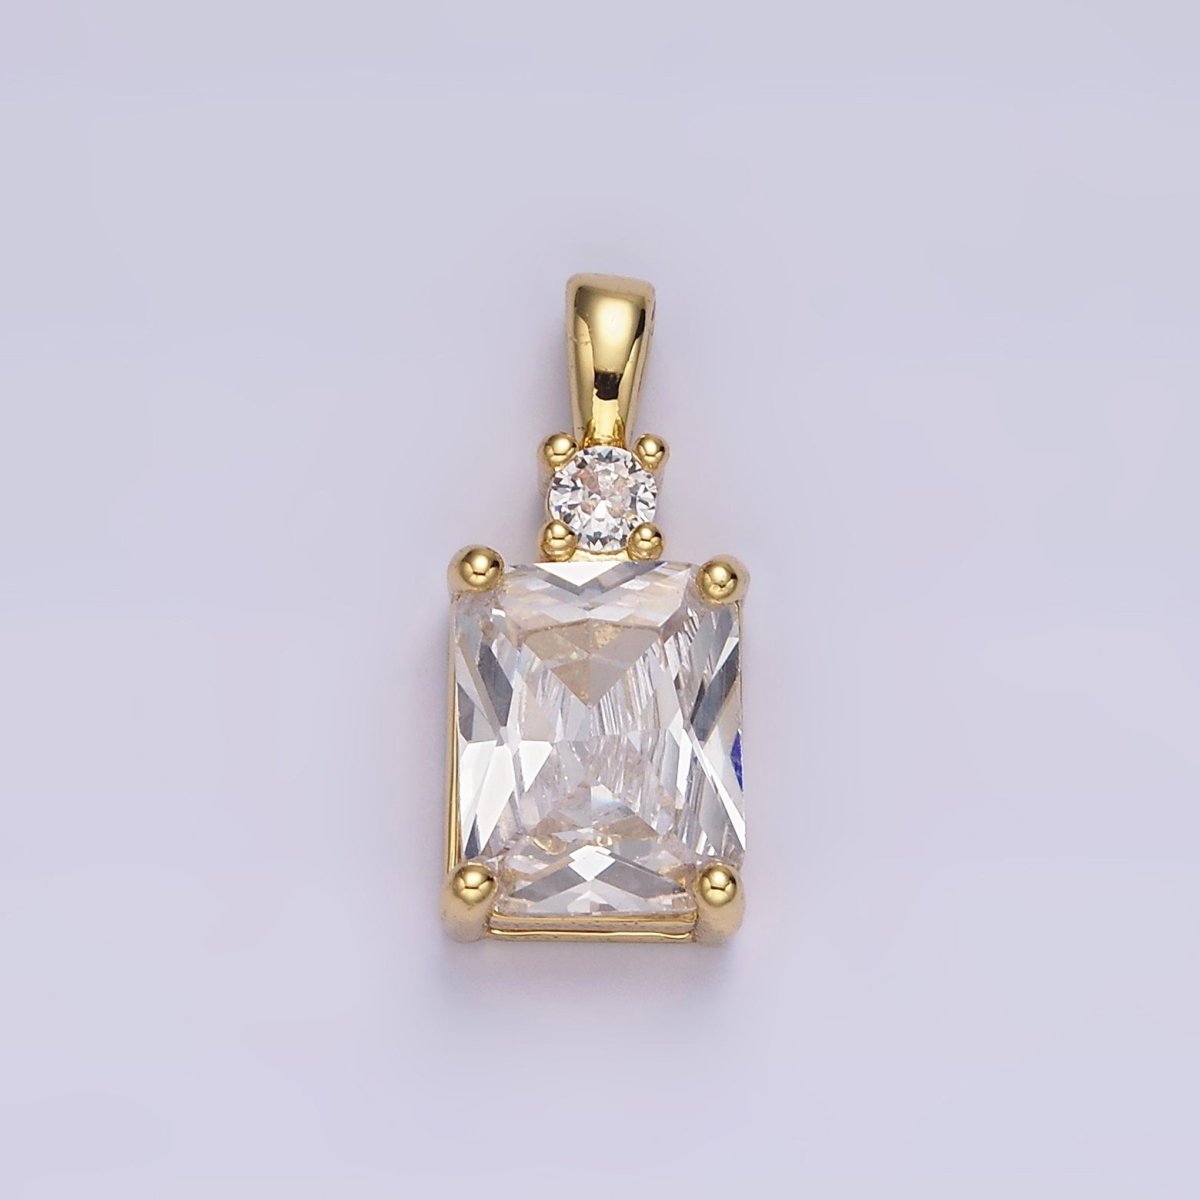 14K Gold Filled Purple, Pink, Clear Baguette Square CZ Pendant | AA659 - AA661 - DLUXCA